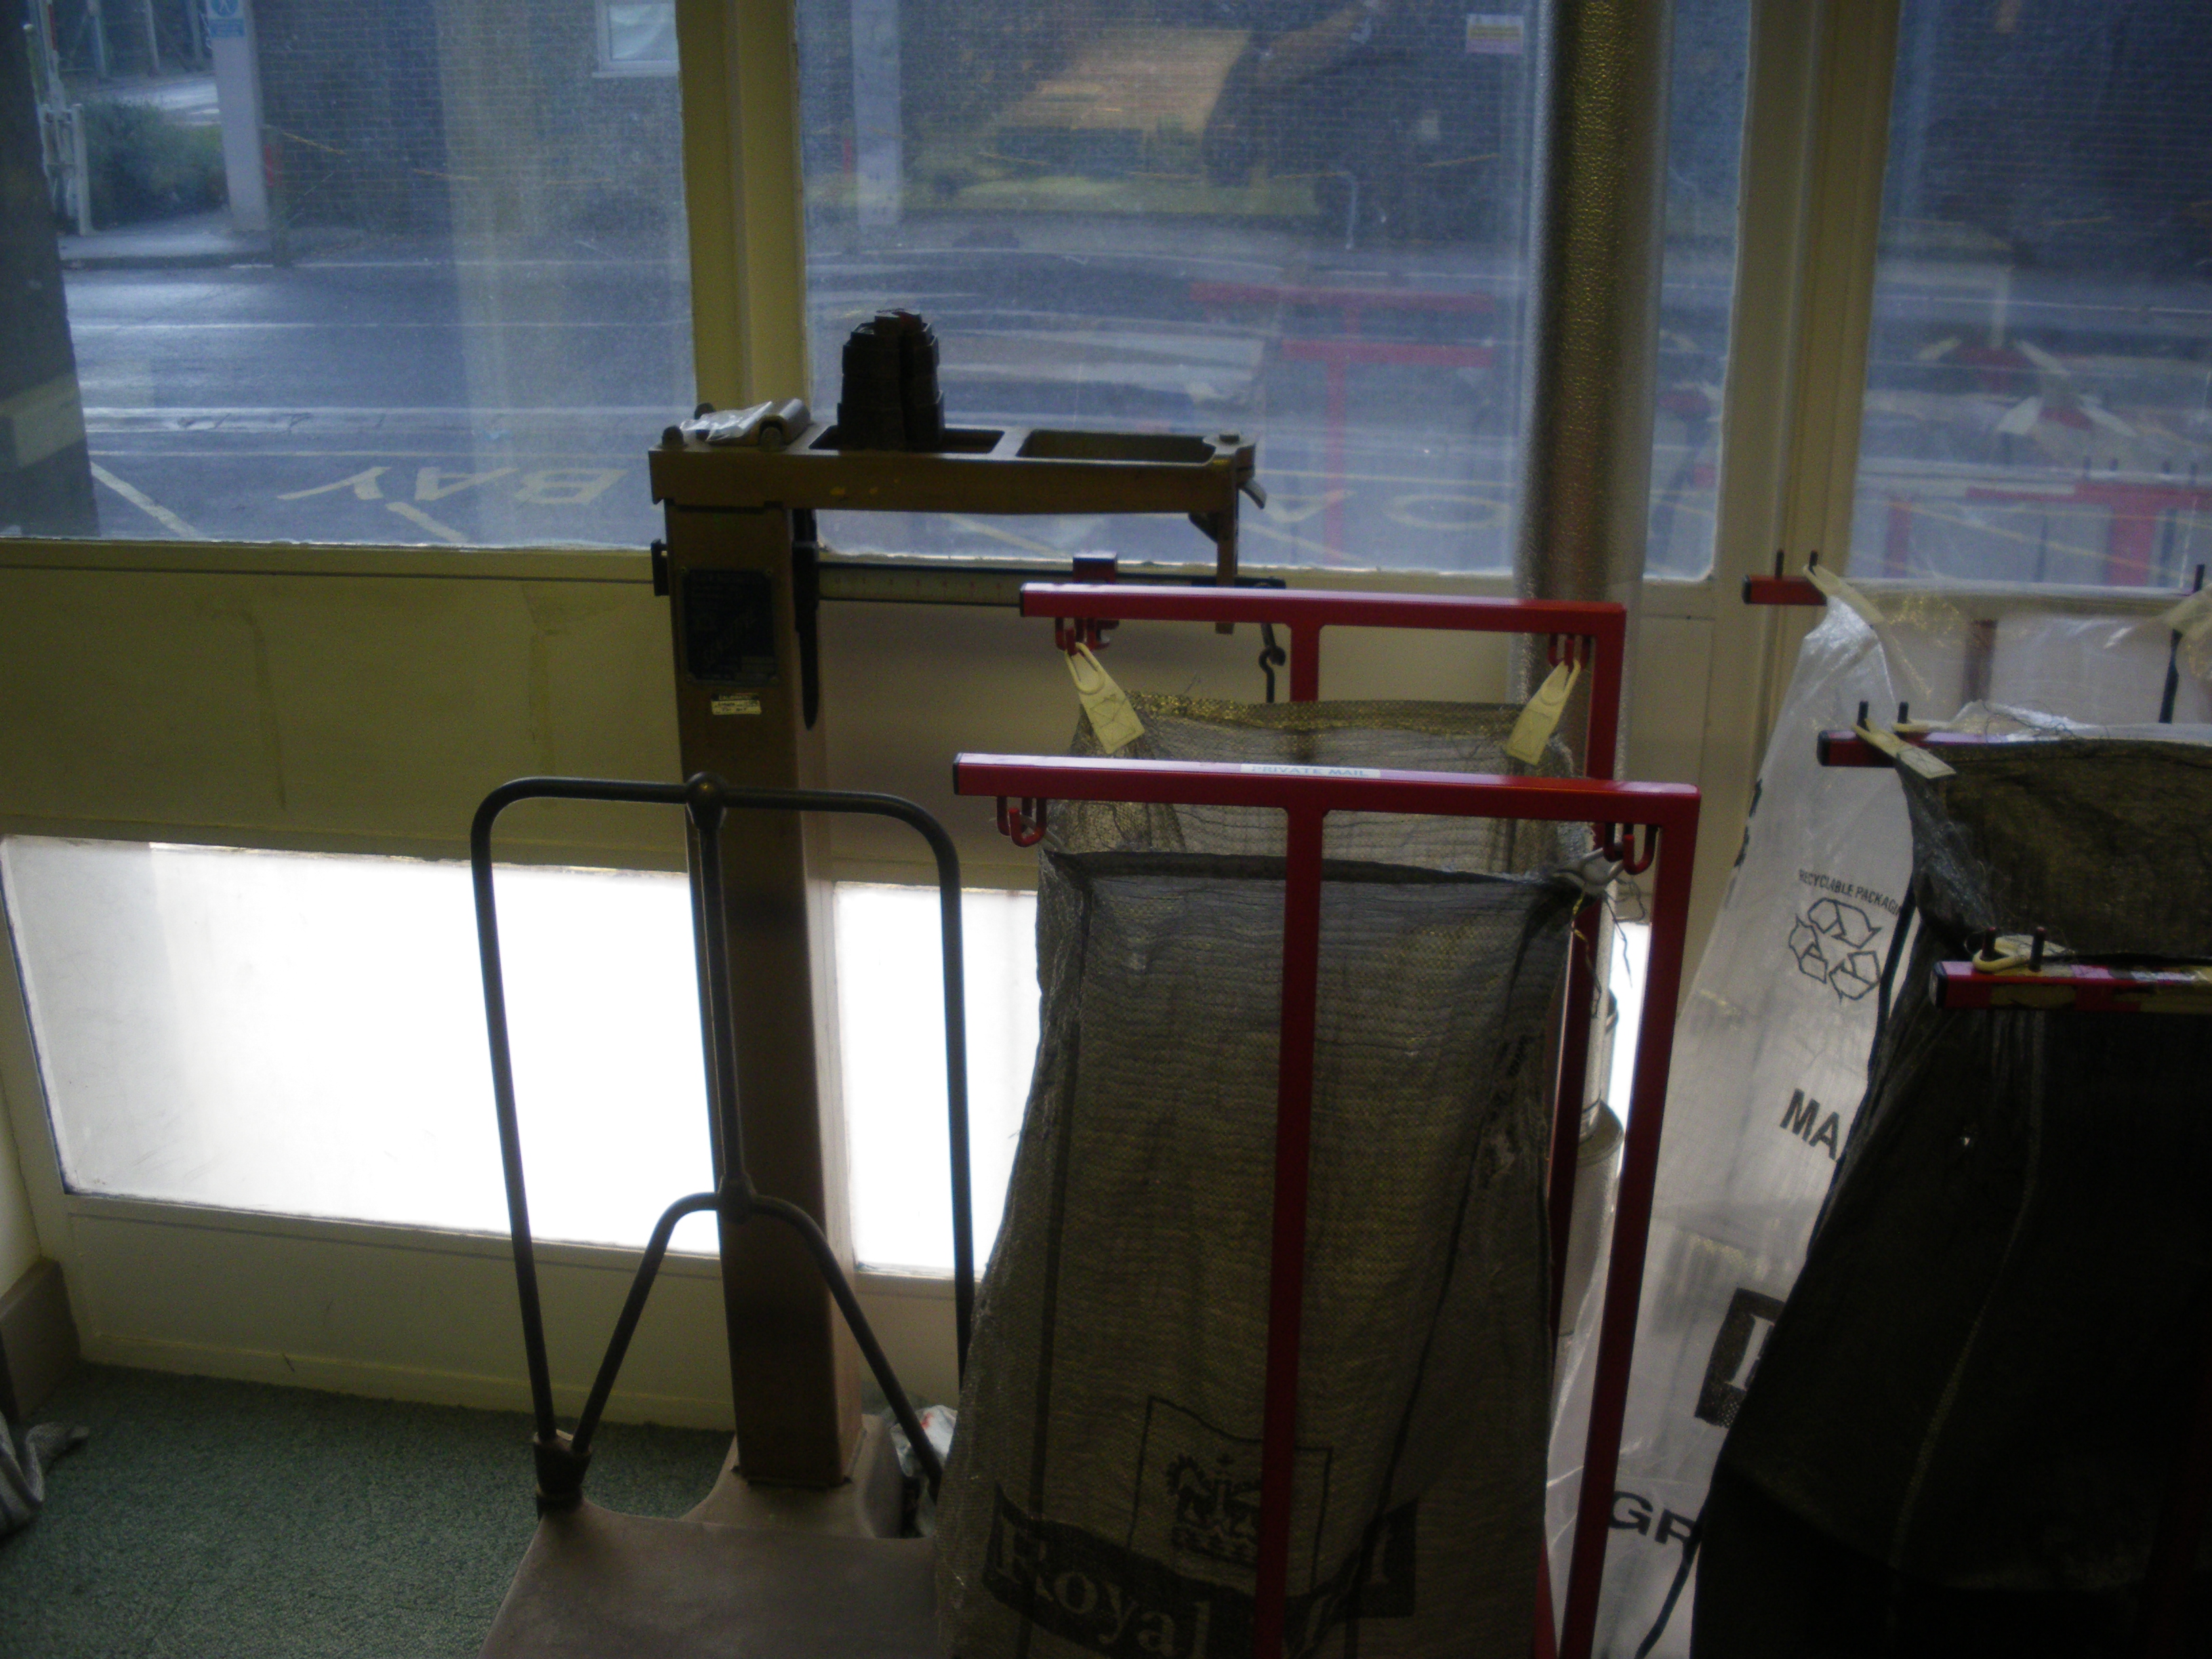 W005 Post Room - scales and private mail sack